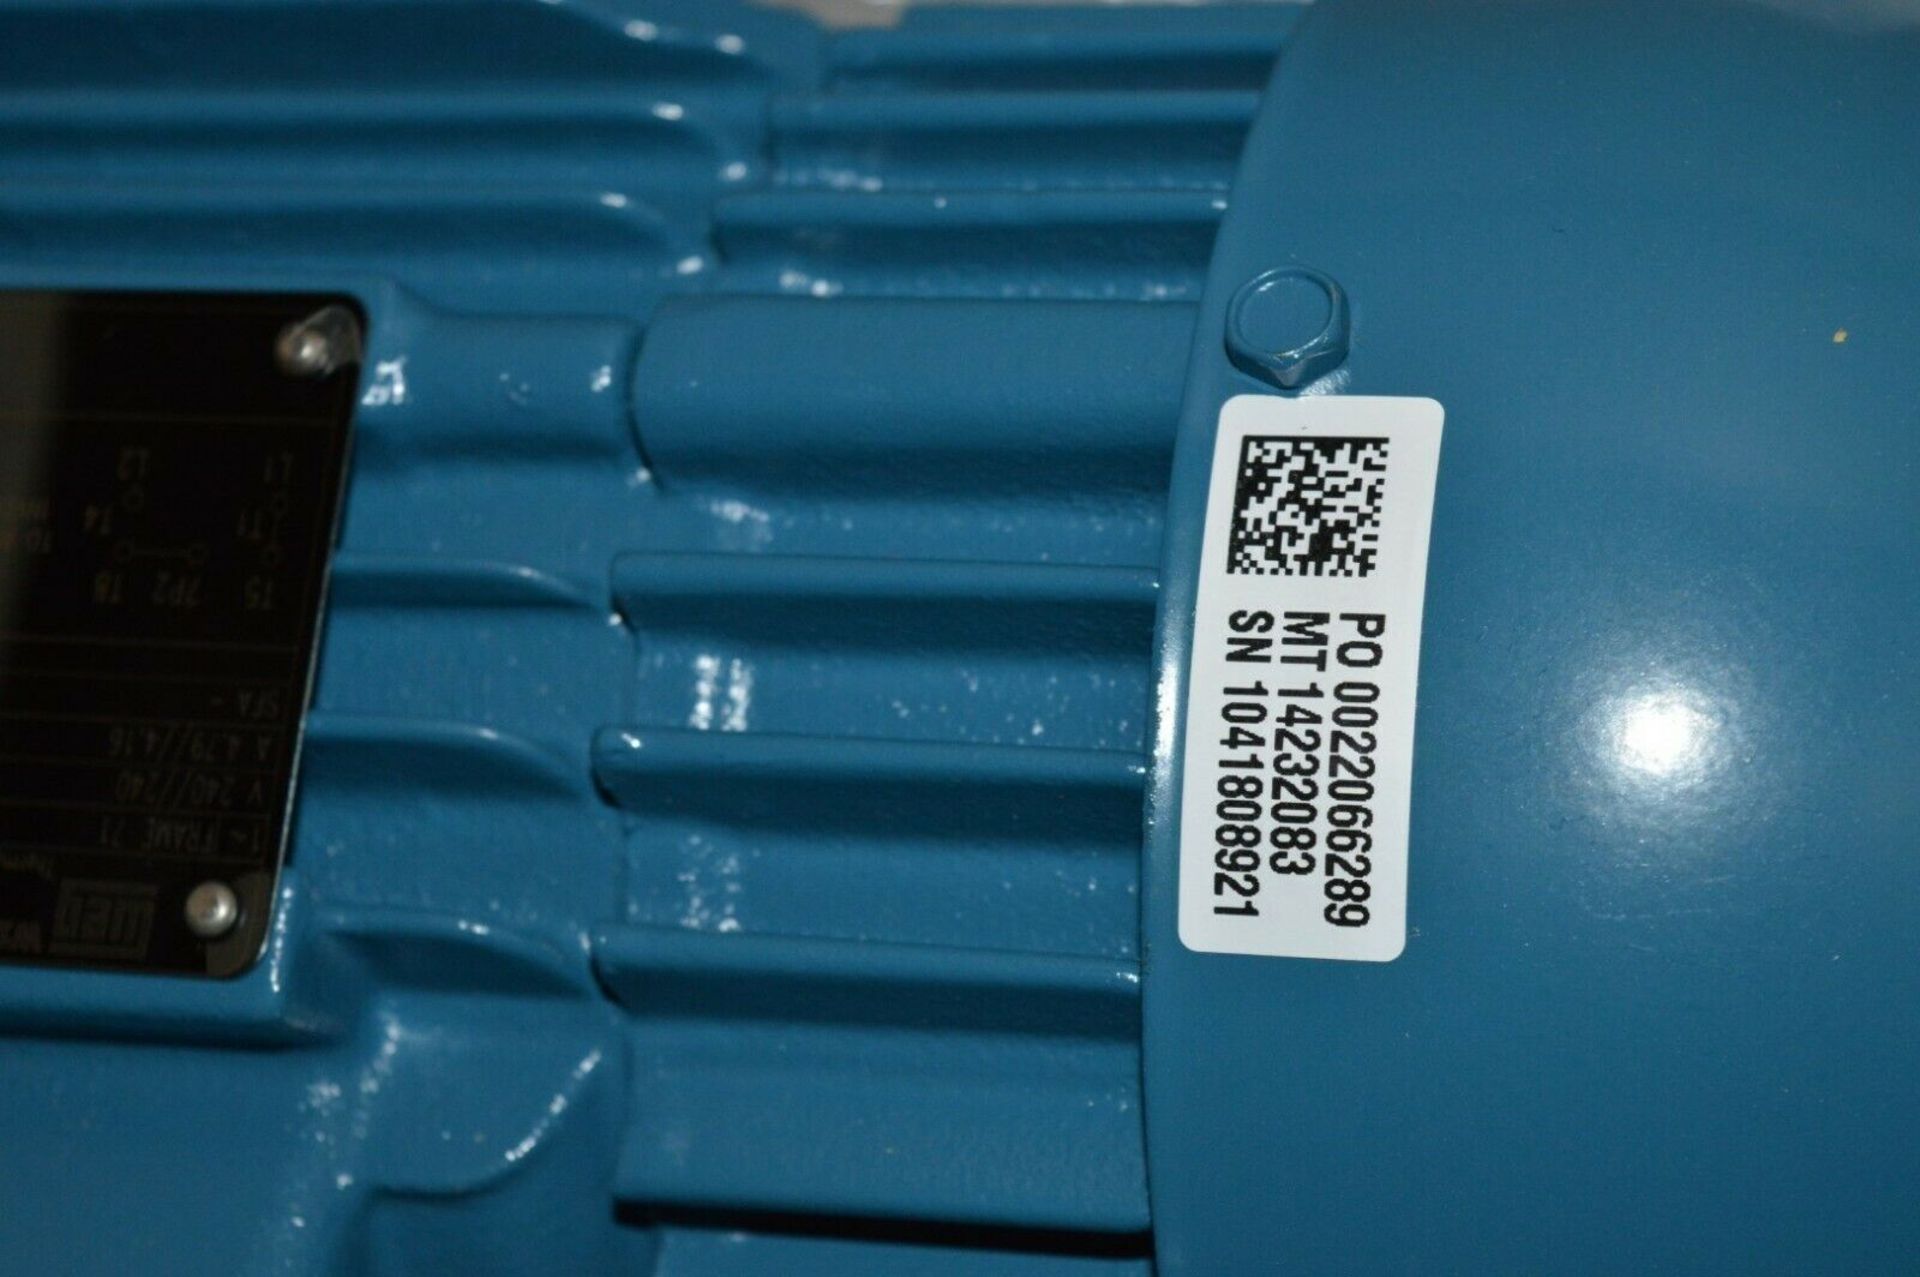 1 x Weg W22 110v IP55 Single Phase Electric Motor - Brand New and Boxed - CL295 - Location: - Image 4 of 7